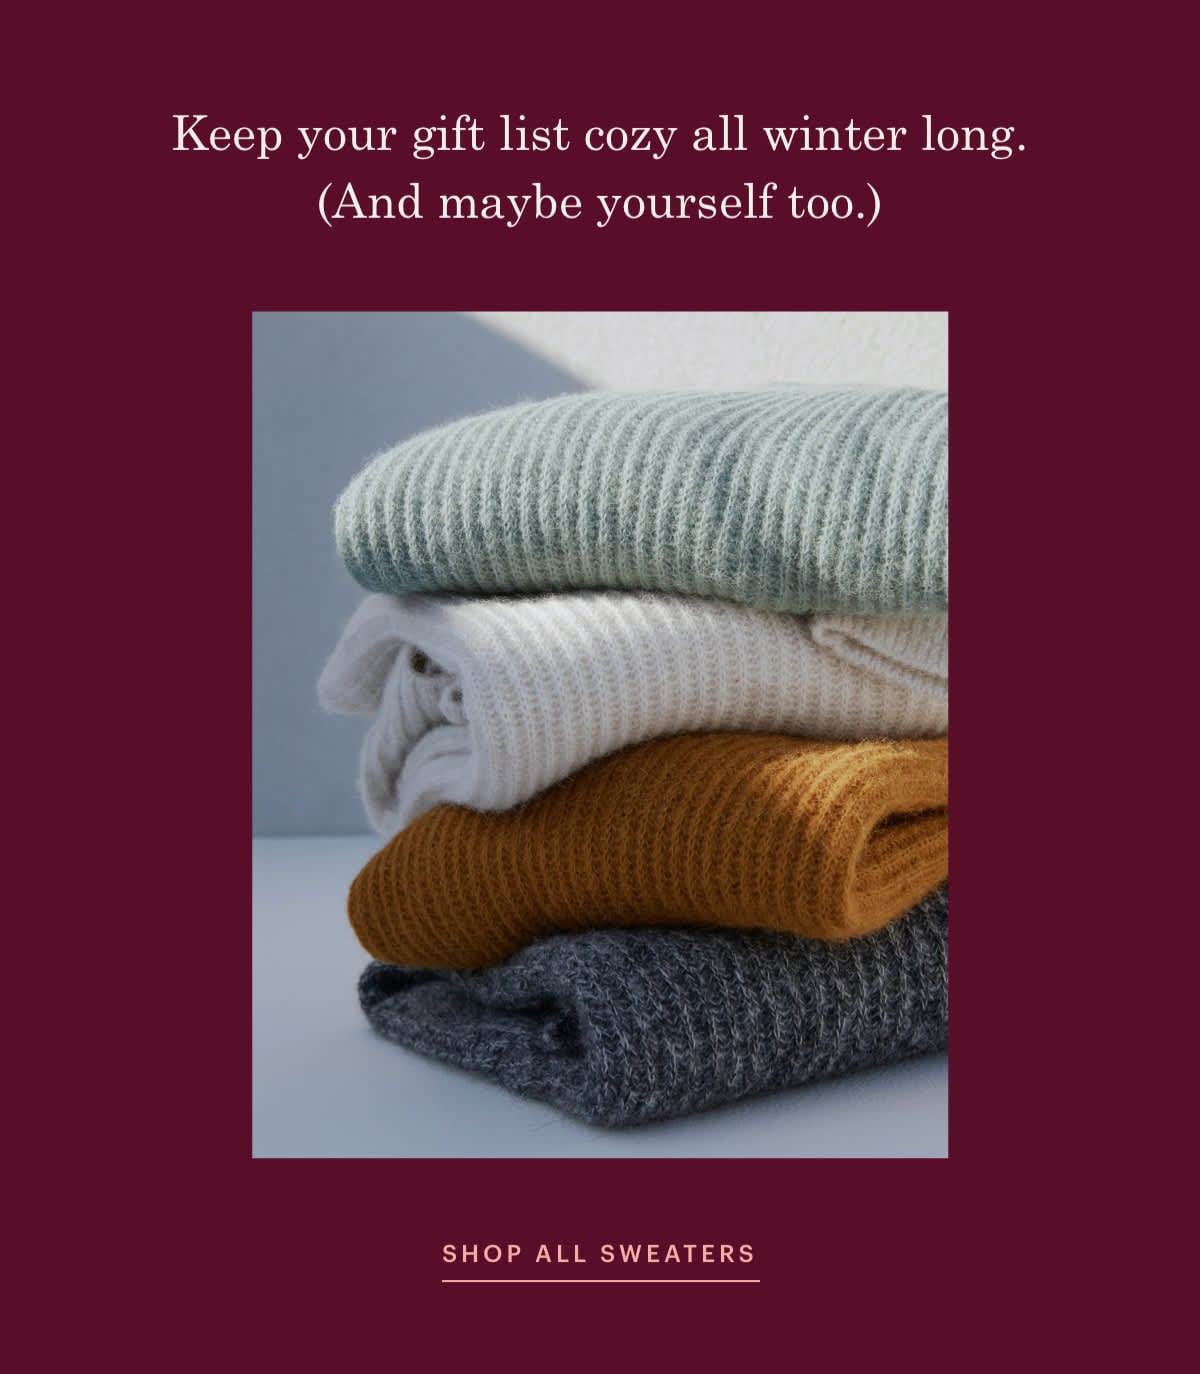 SHOP ALL SWEATERS